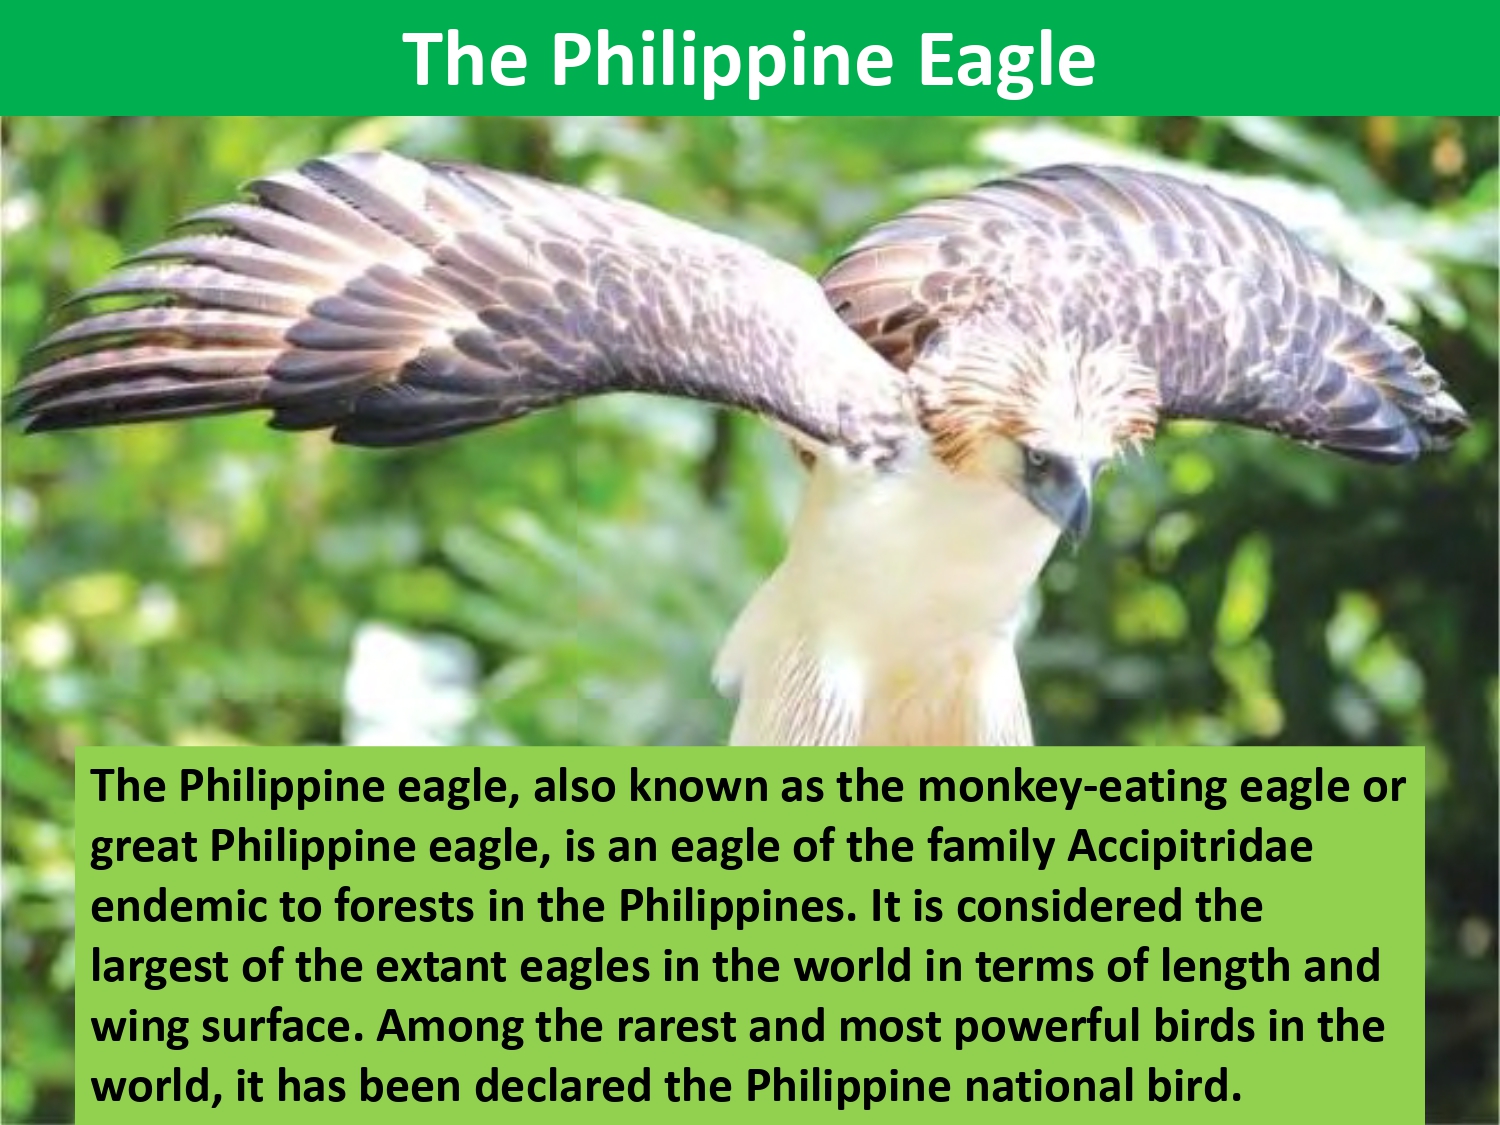 The Philippine eagle, also known as the monkey-eating eagle or great Philippine eagle, is an eagle of the family Accipitridae endemic to forests in the Philippines. It is considered the largest of the extant eagles in the world in terms of length and wing surface. Among the rarest and most powerful birds in the world, it has been declared the Philippine national bird